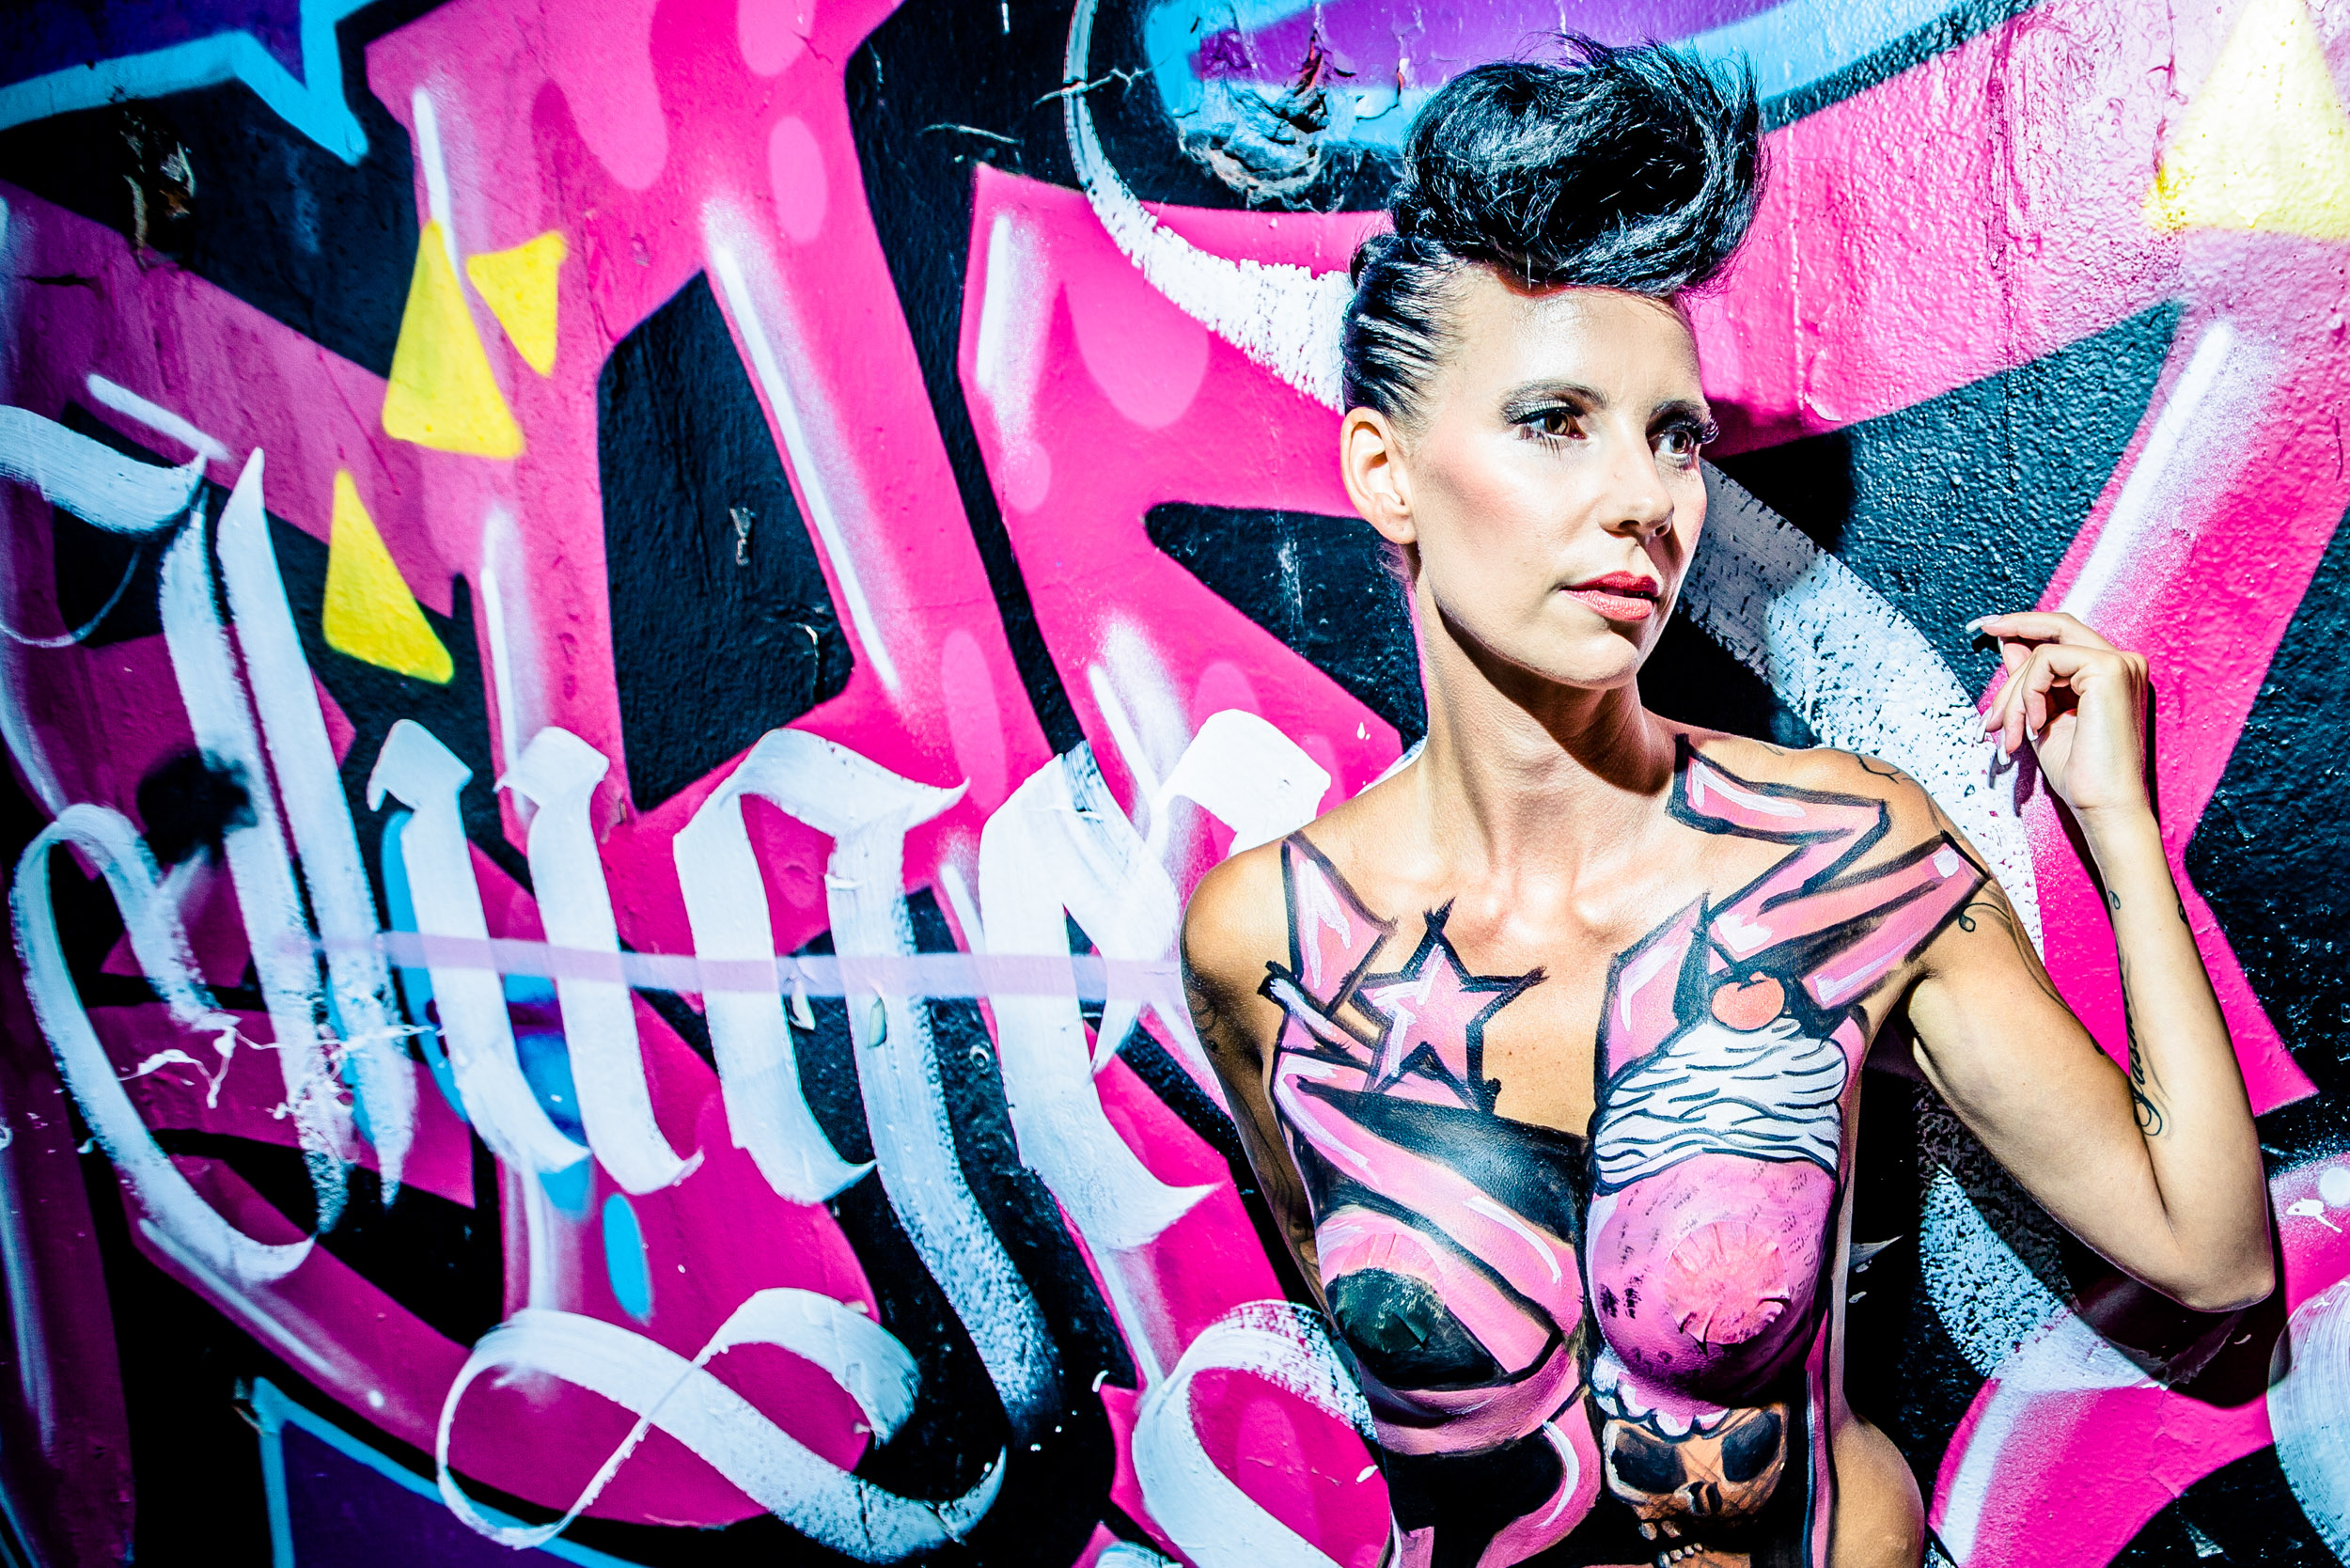 bodypainting-conti-lostplace-hannover-18